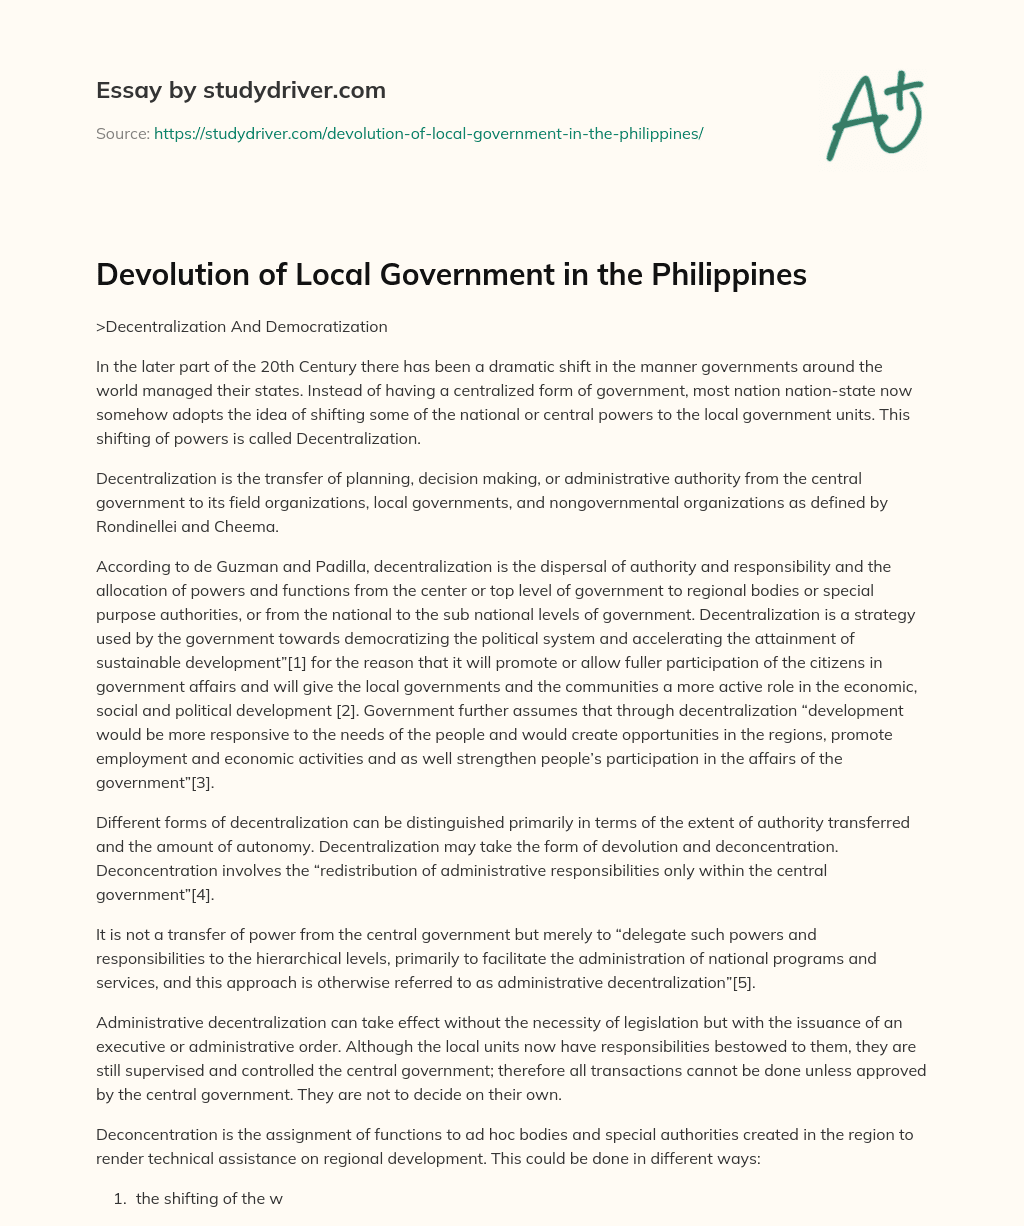 Devolution of Local Government in the Philippines essay